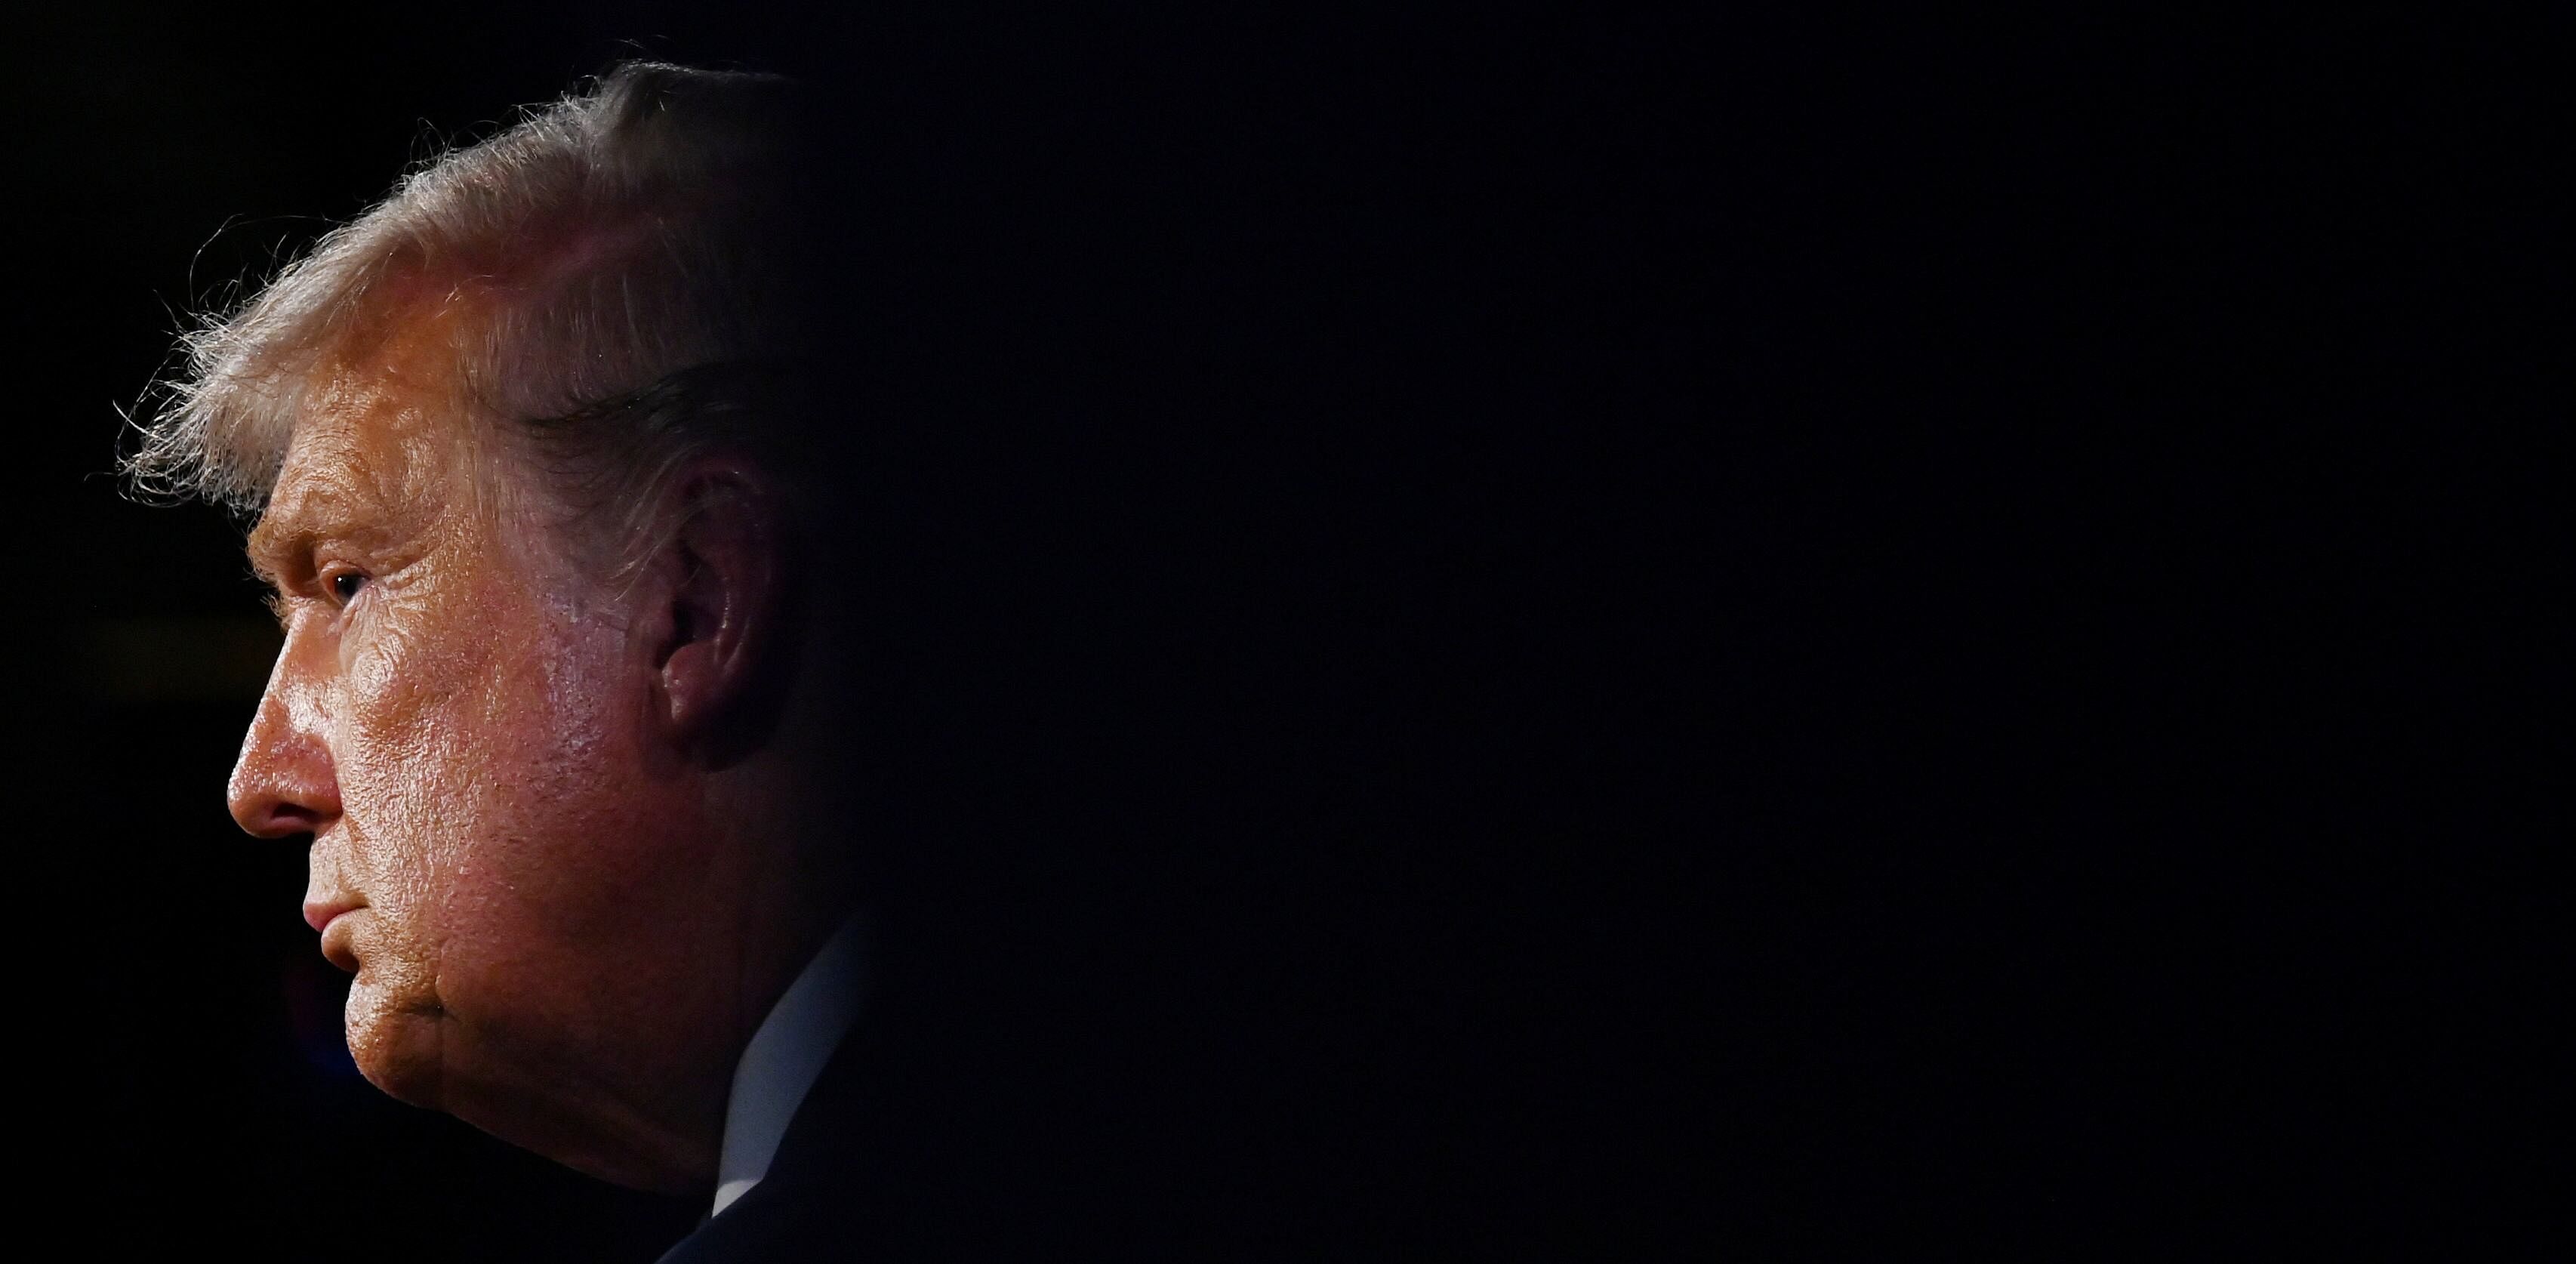 With his reluctance to accept defeat, Donald Trump could be pushing America to the brink of civil chaos, perhaps even civil war, proving that trust in a democratic process is only as good as the trustworthiness of its topmost individual. Credit: Reuters